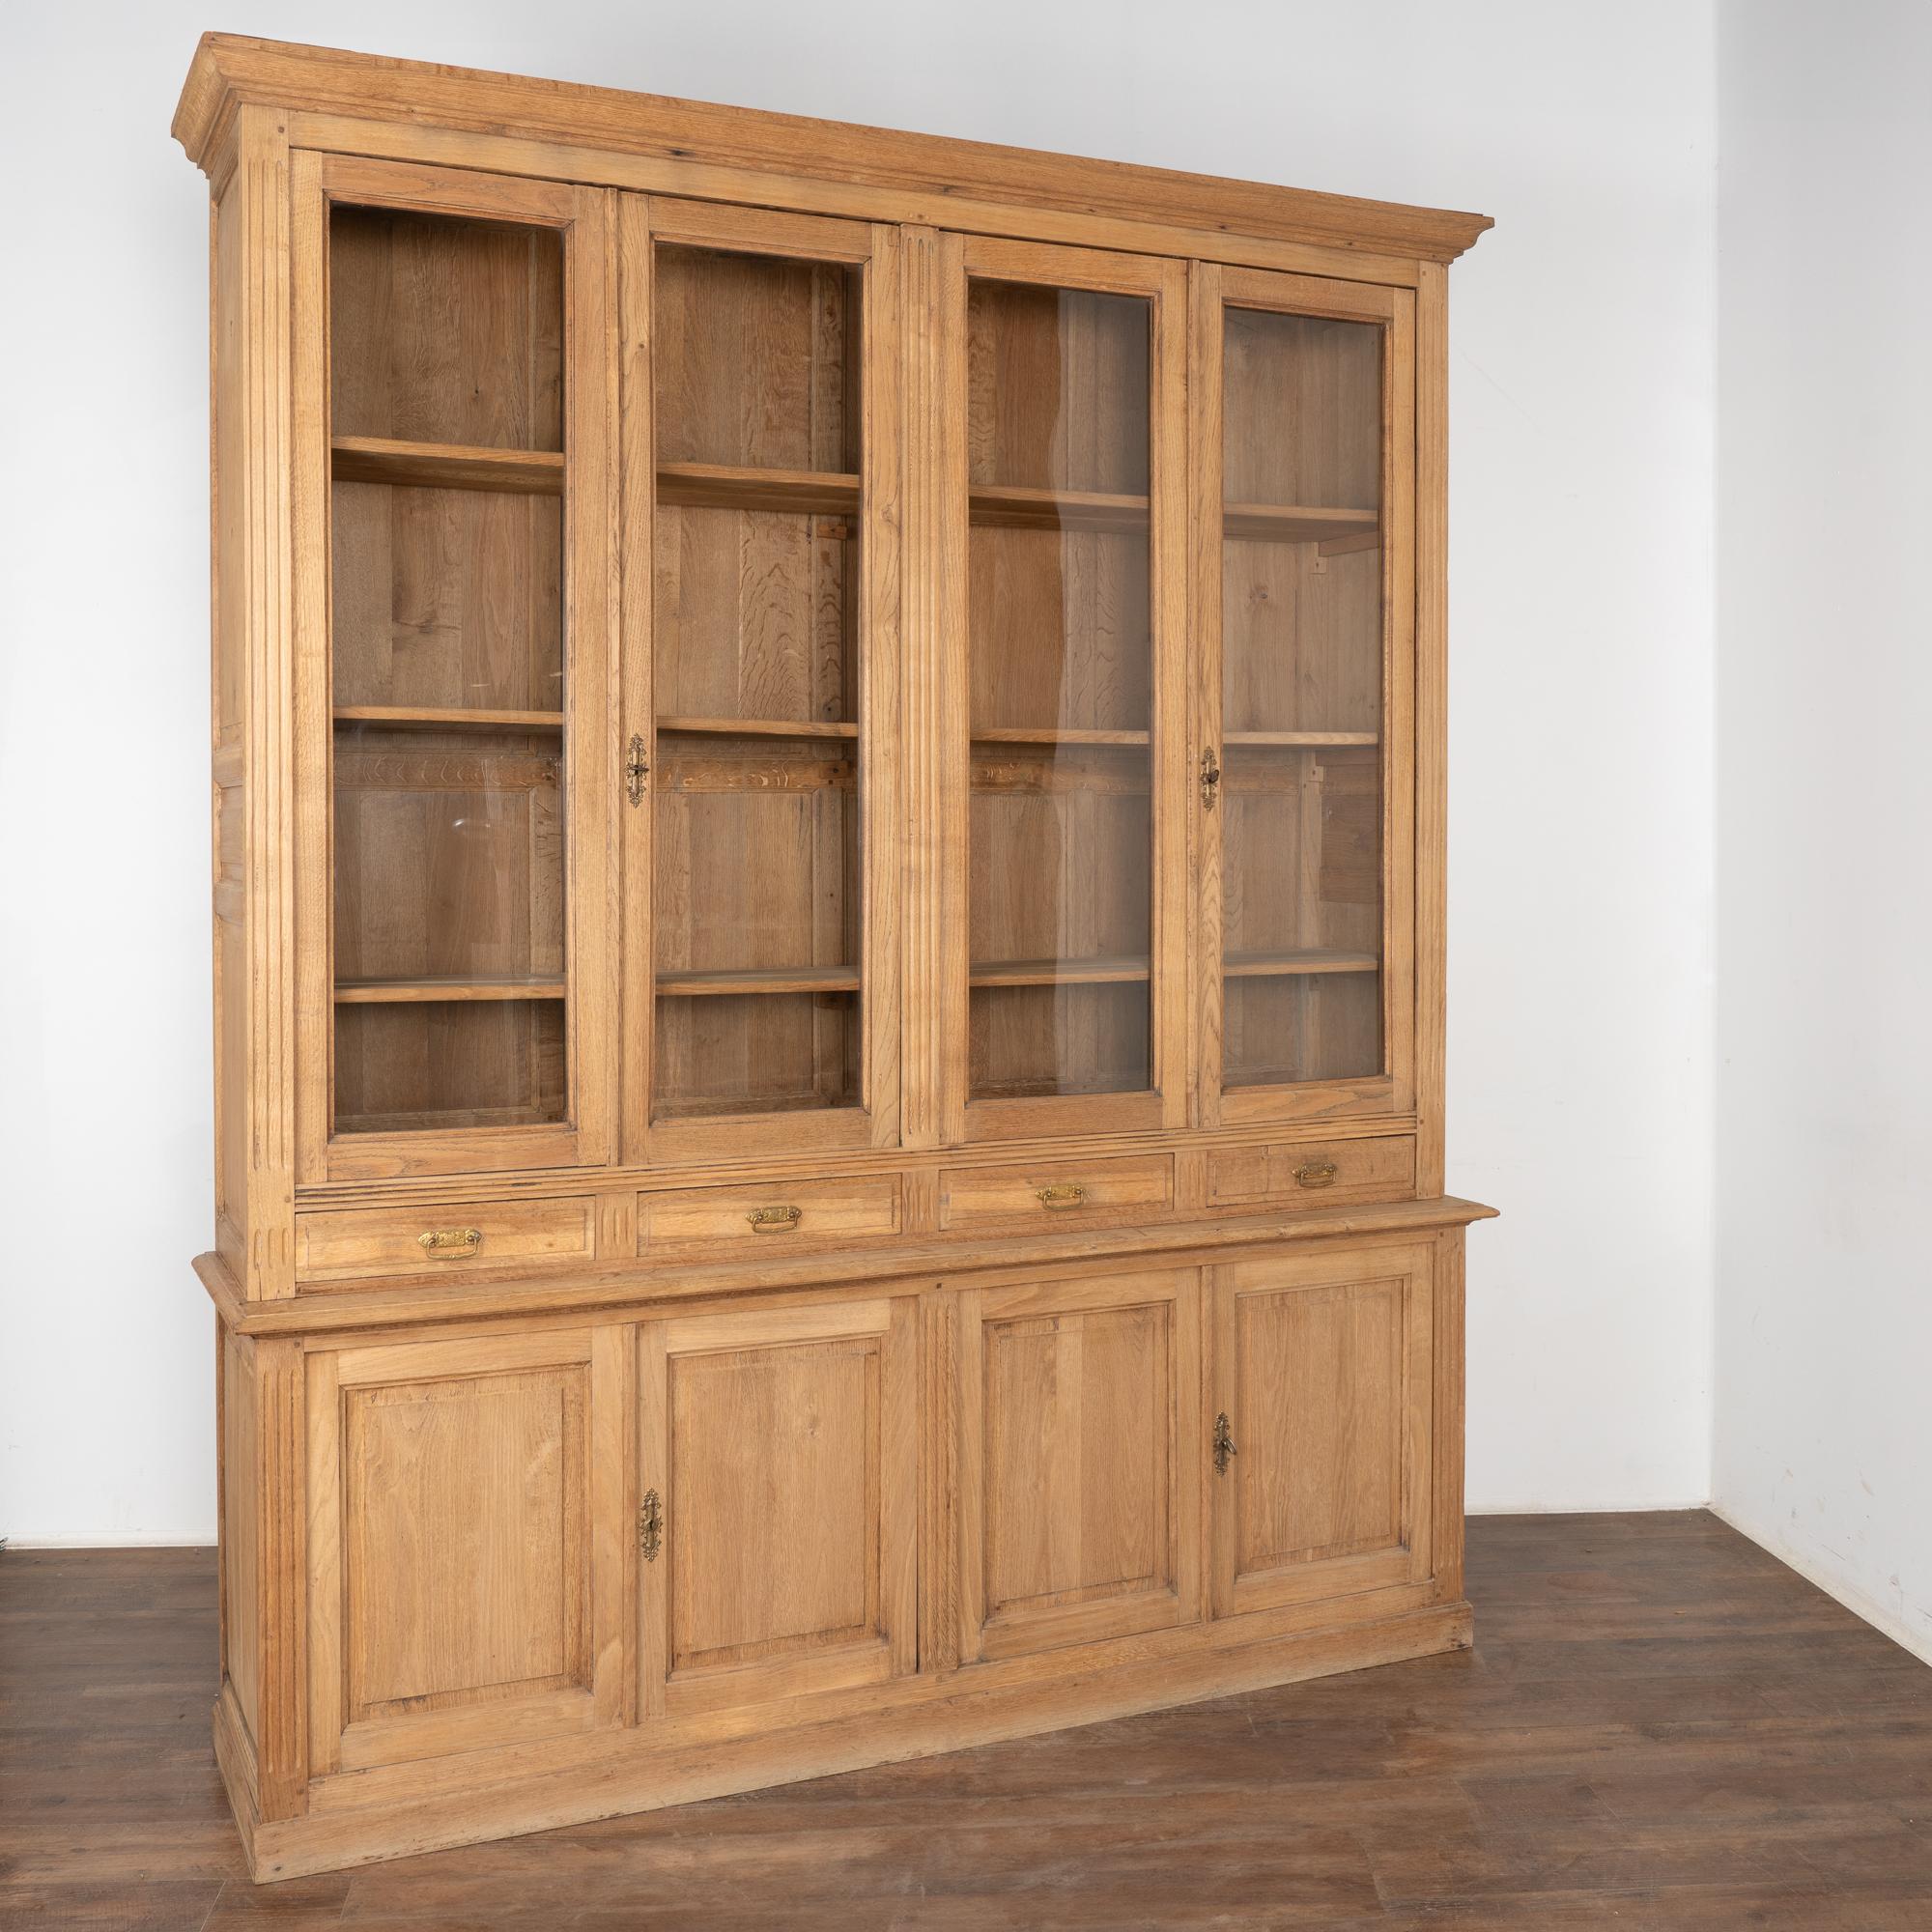 This impressive oak bookcase has four upper glass paneled cabinet doors and four panel cabinet doors below.
The oak has been bleached creating a fresh, lighter finish for today's modern home.
This large display cabinet is made in two sections, upper